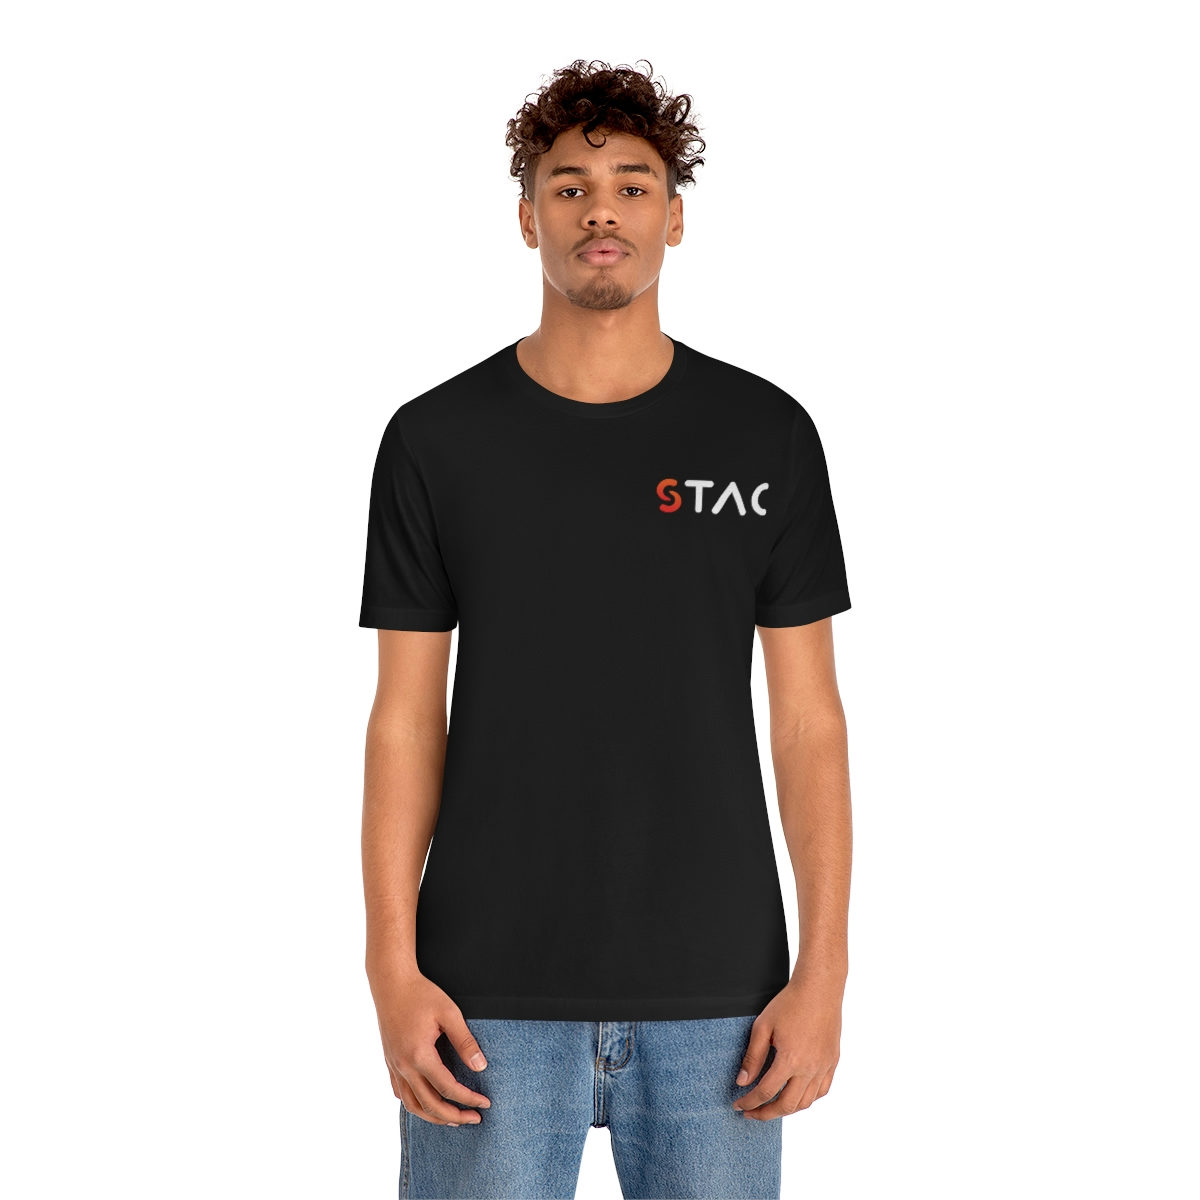 A young medium skin tone male model wearing a black t-shirt with stylized "STAC" over the left breast.